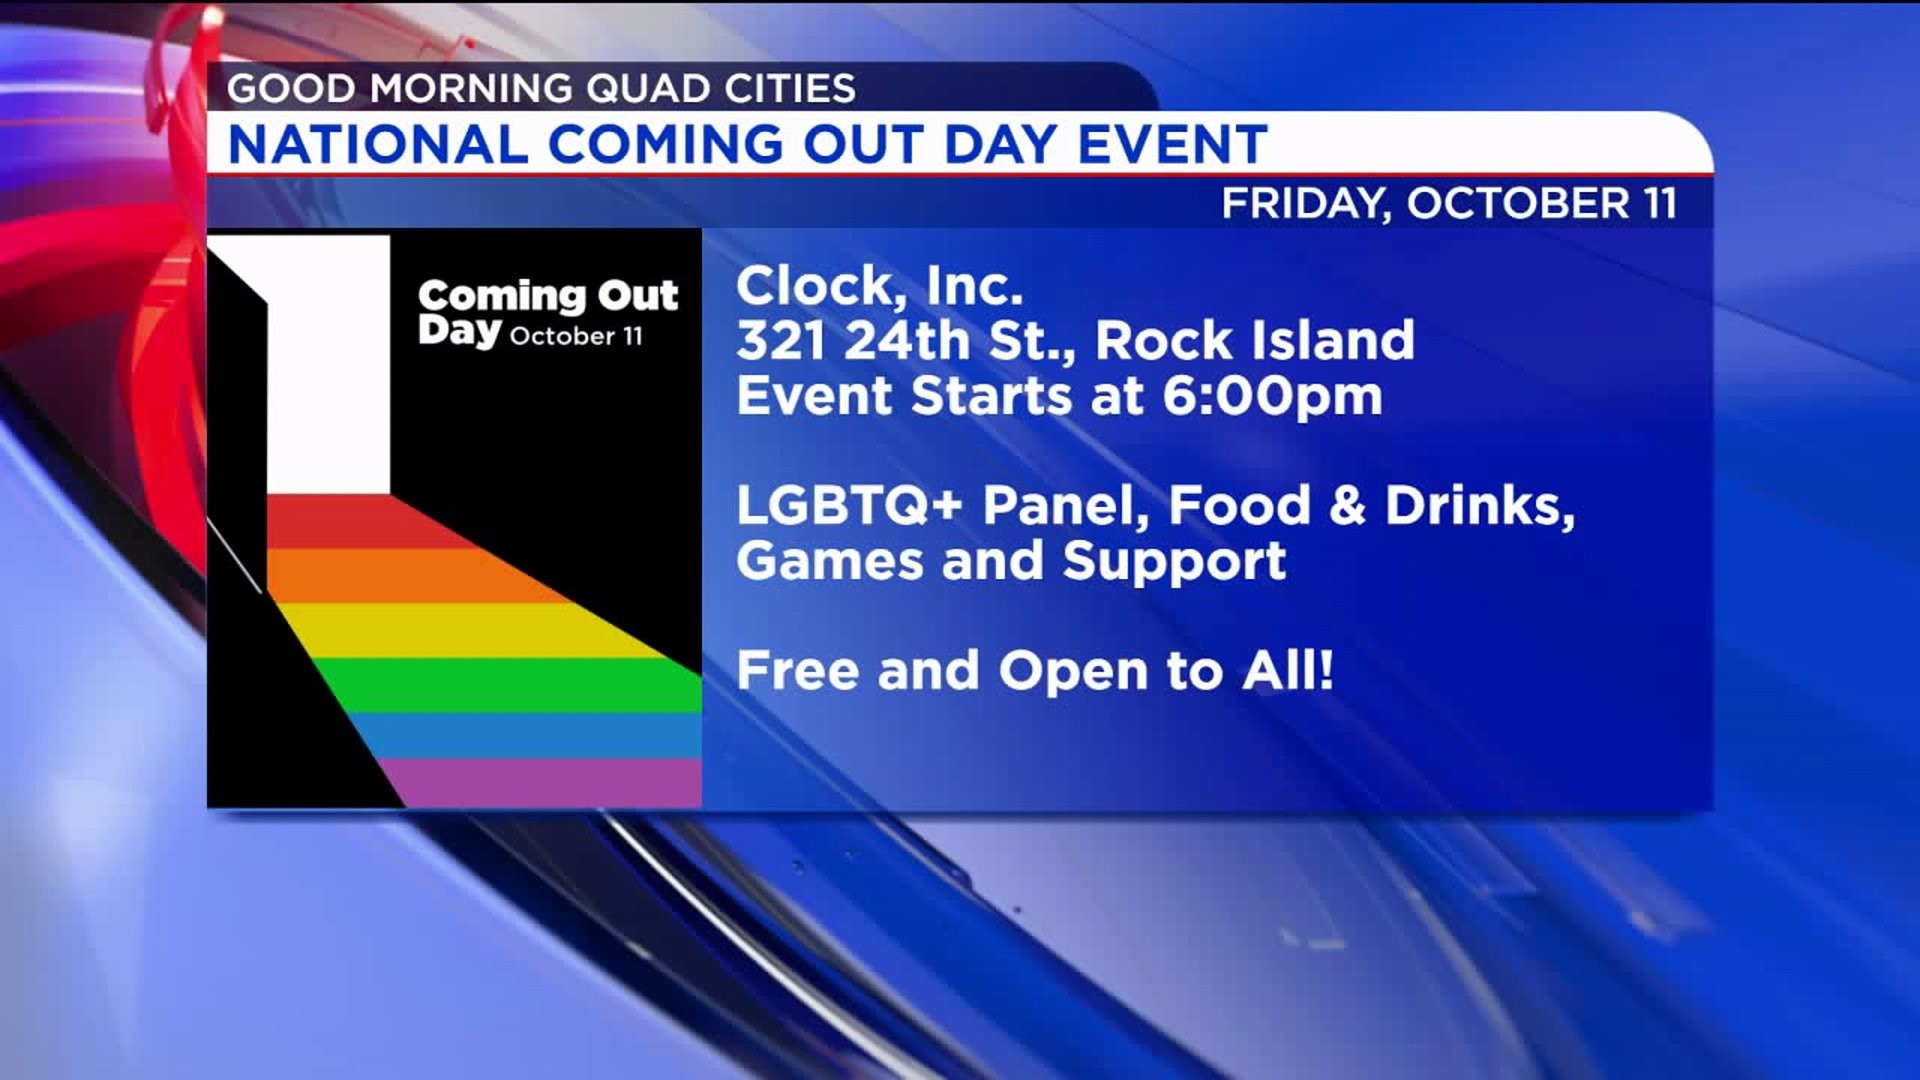 National Coming Out Day is Friday, October 11th